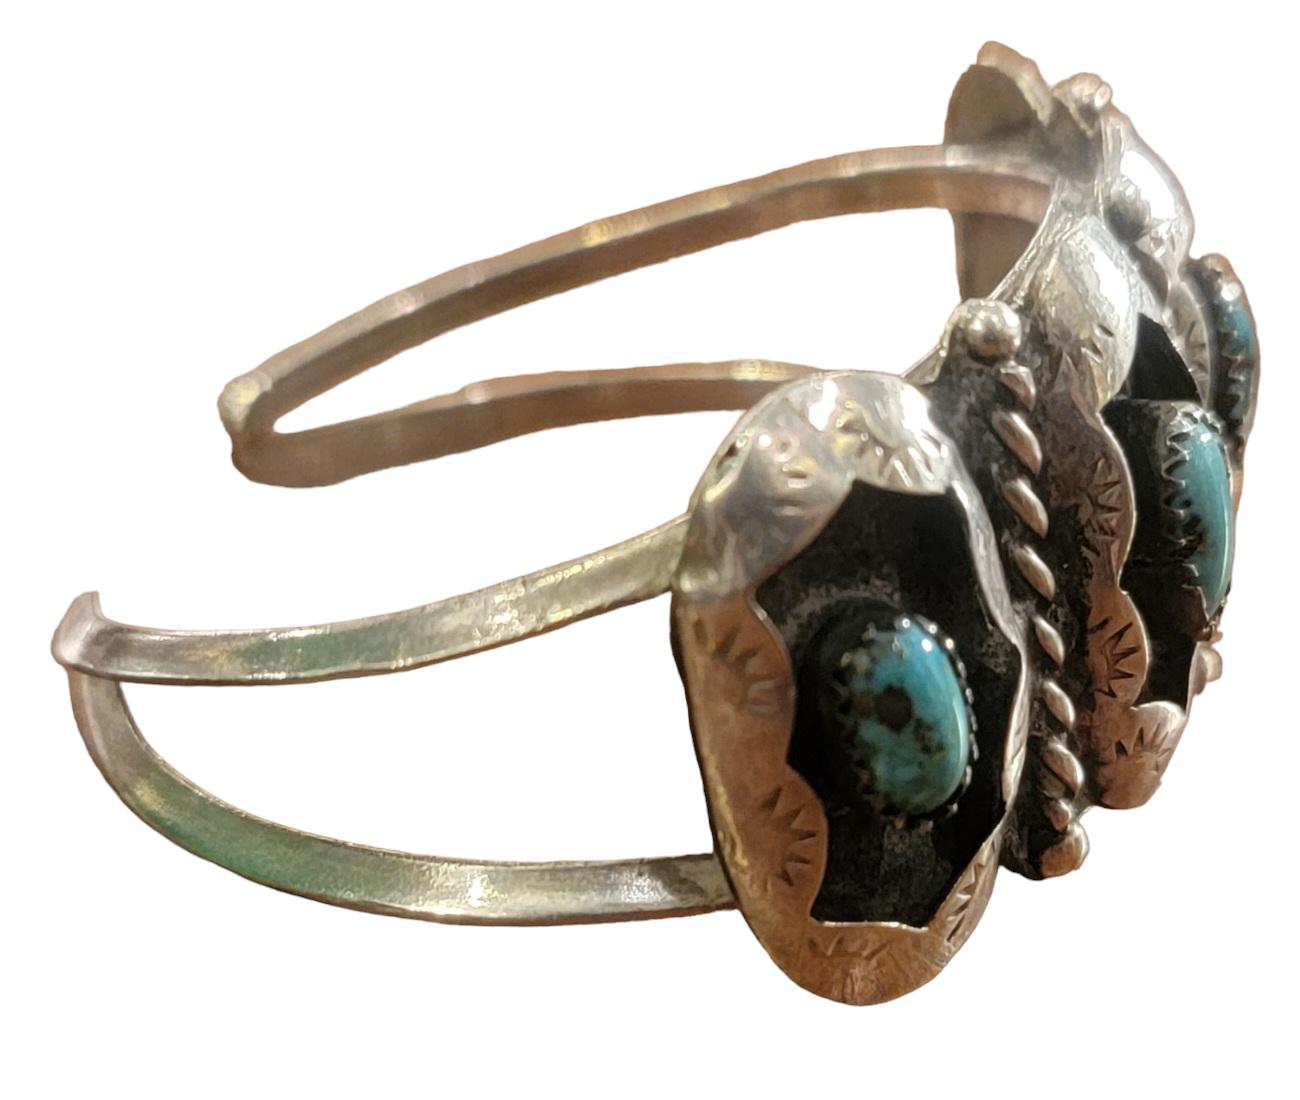 1970s Sterling King Man Native American Bracelet. Turquoise cuff bracelet Kingman. Hand made with sterling silver and turquois stones. Amazing quality sterling.

Stones are embedded within the sterling in each pocket, There is a sterling twist in